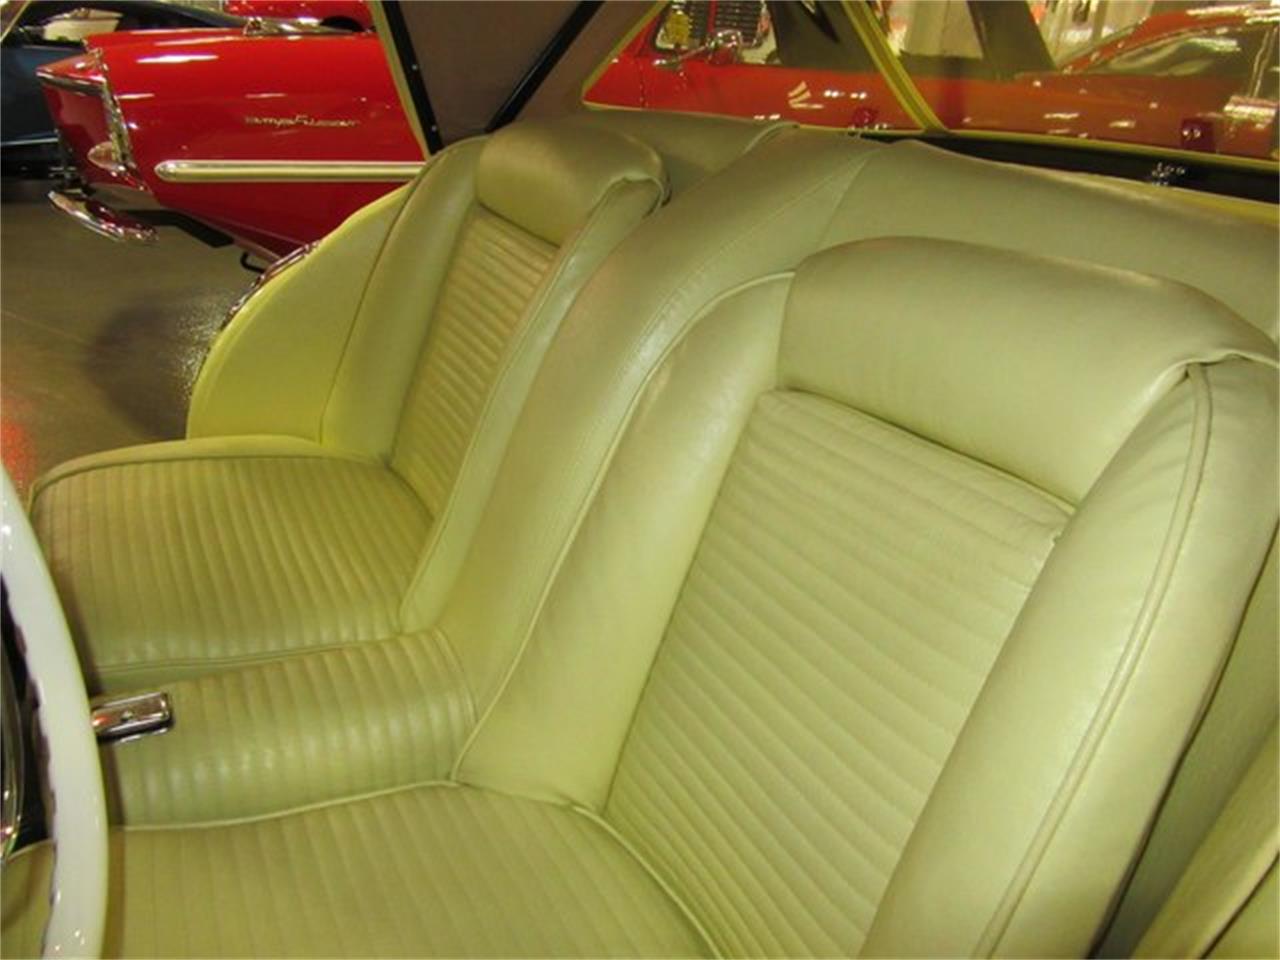 1954 Kaiser Darrin for sale in Greenwood, IN – photo 53